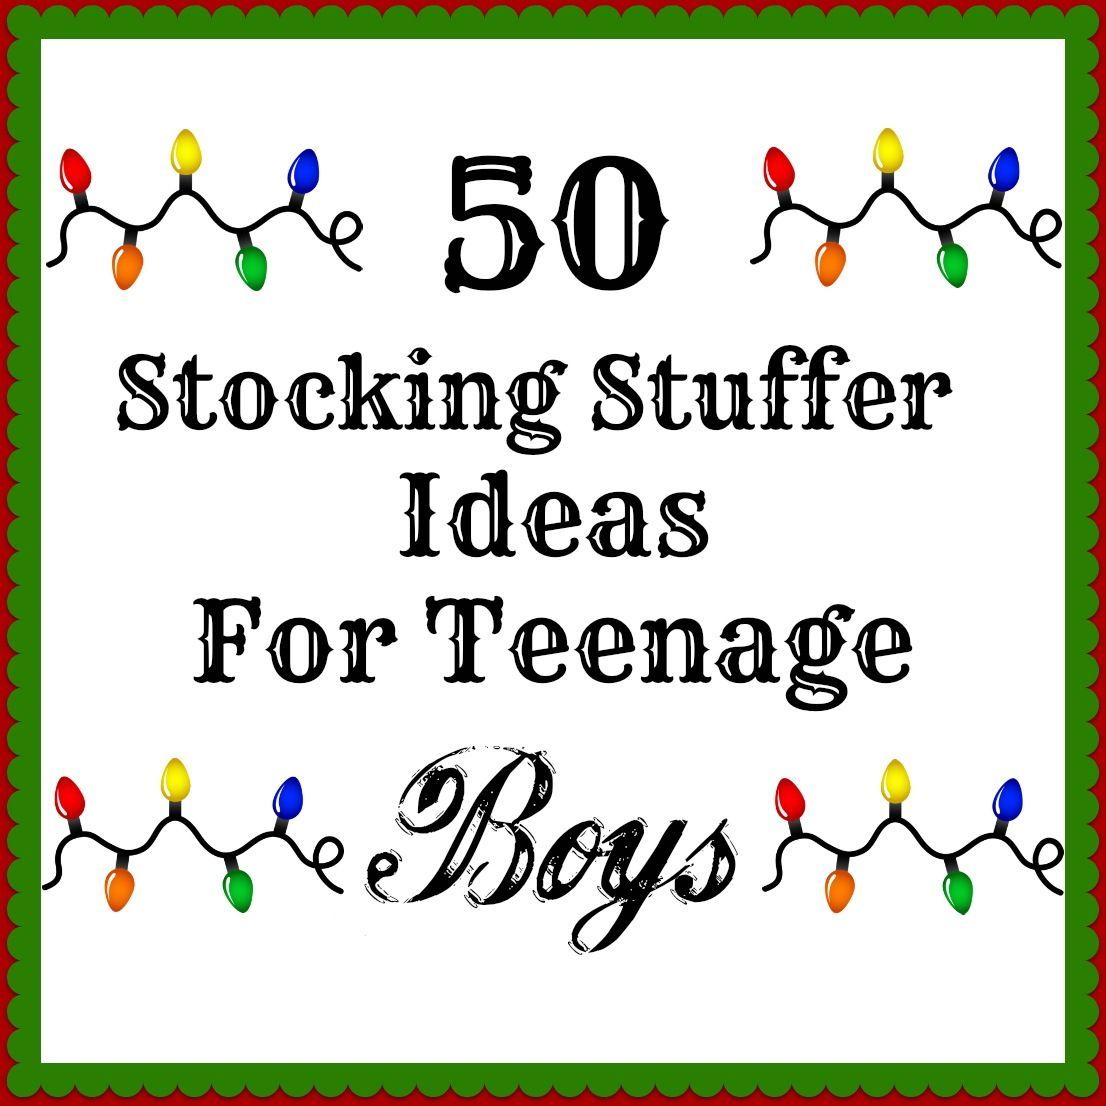 50 Stocking Stuffers For Teenage Boys !! I have a 16 year old one myself ….and he doesn’t like the regular stuff b/c of his